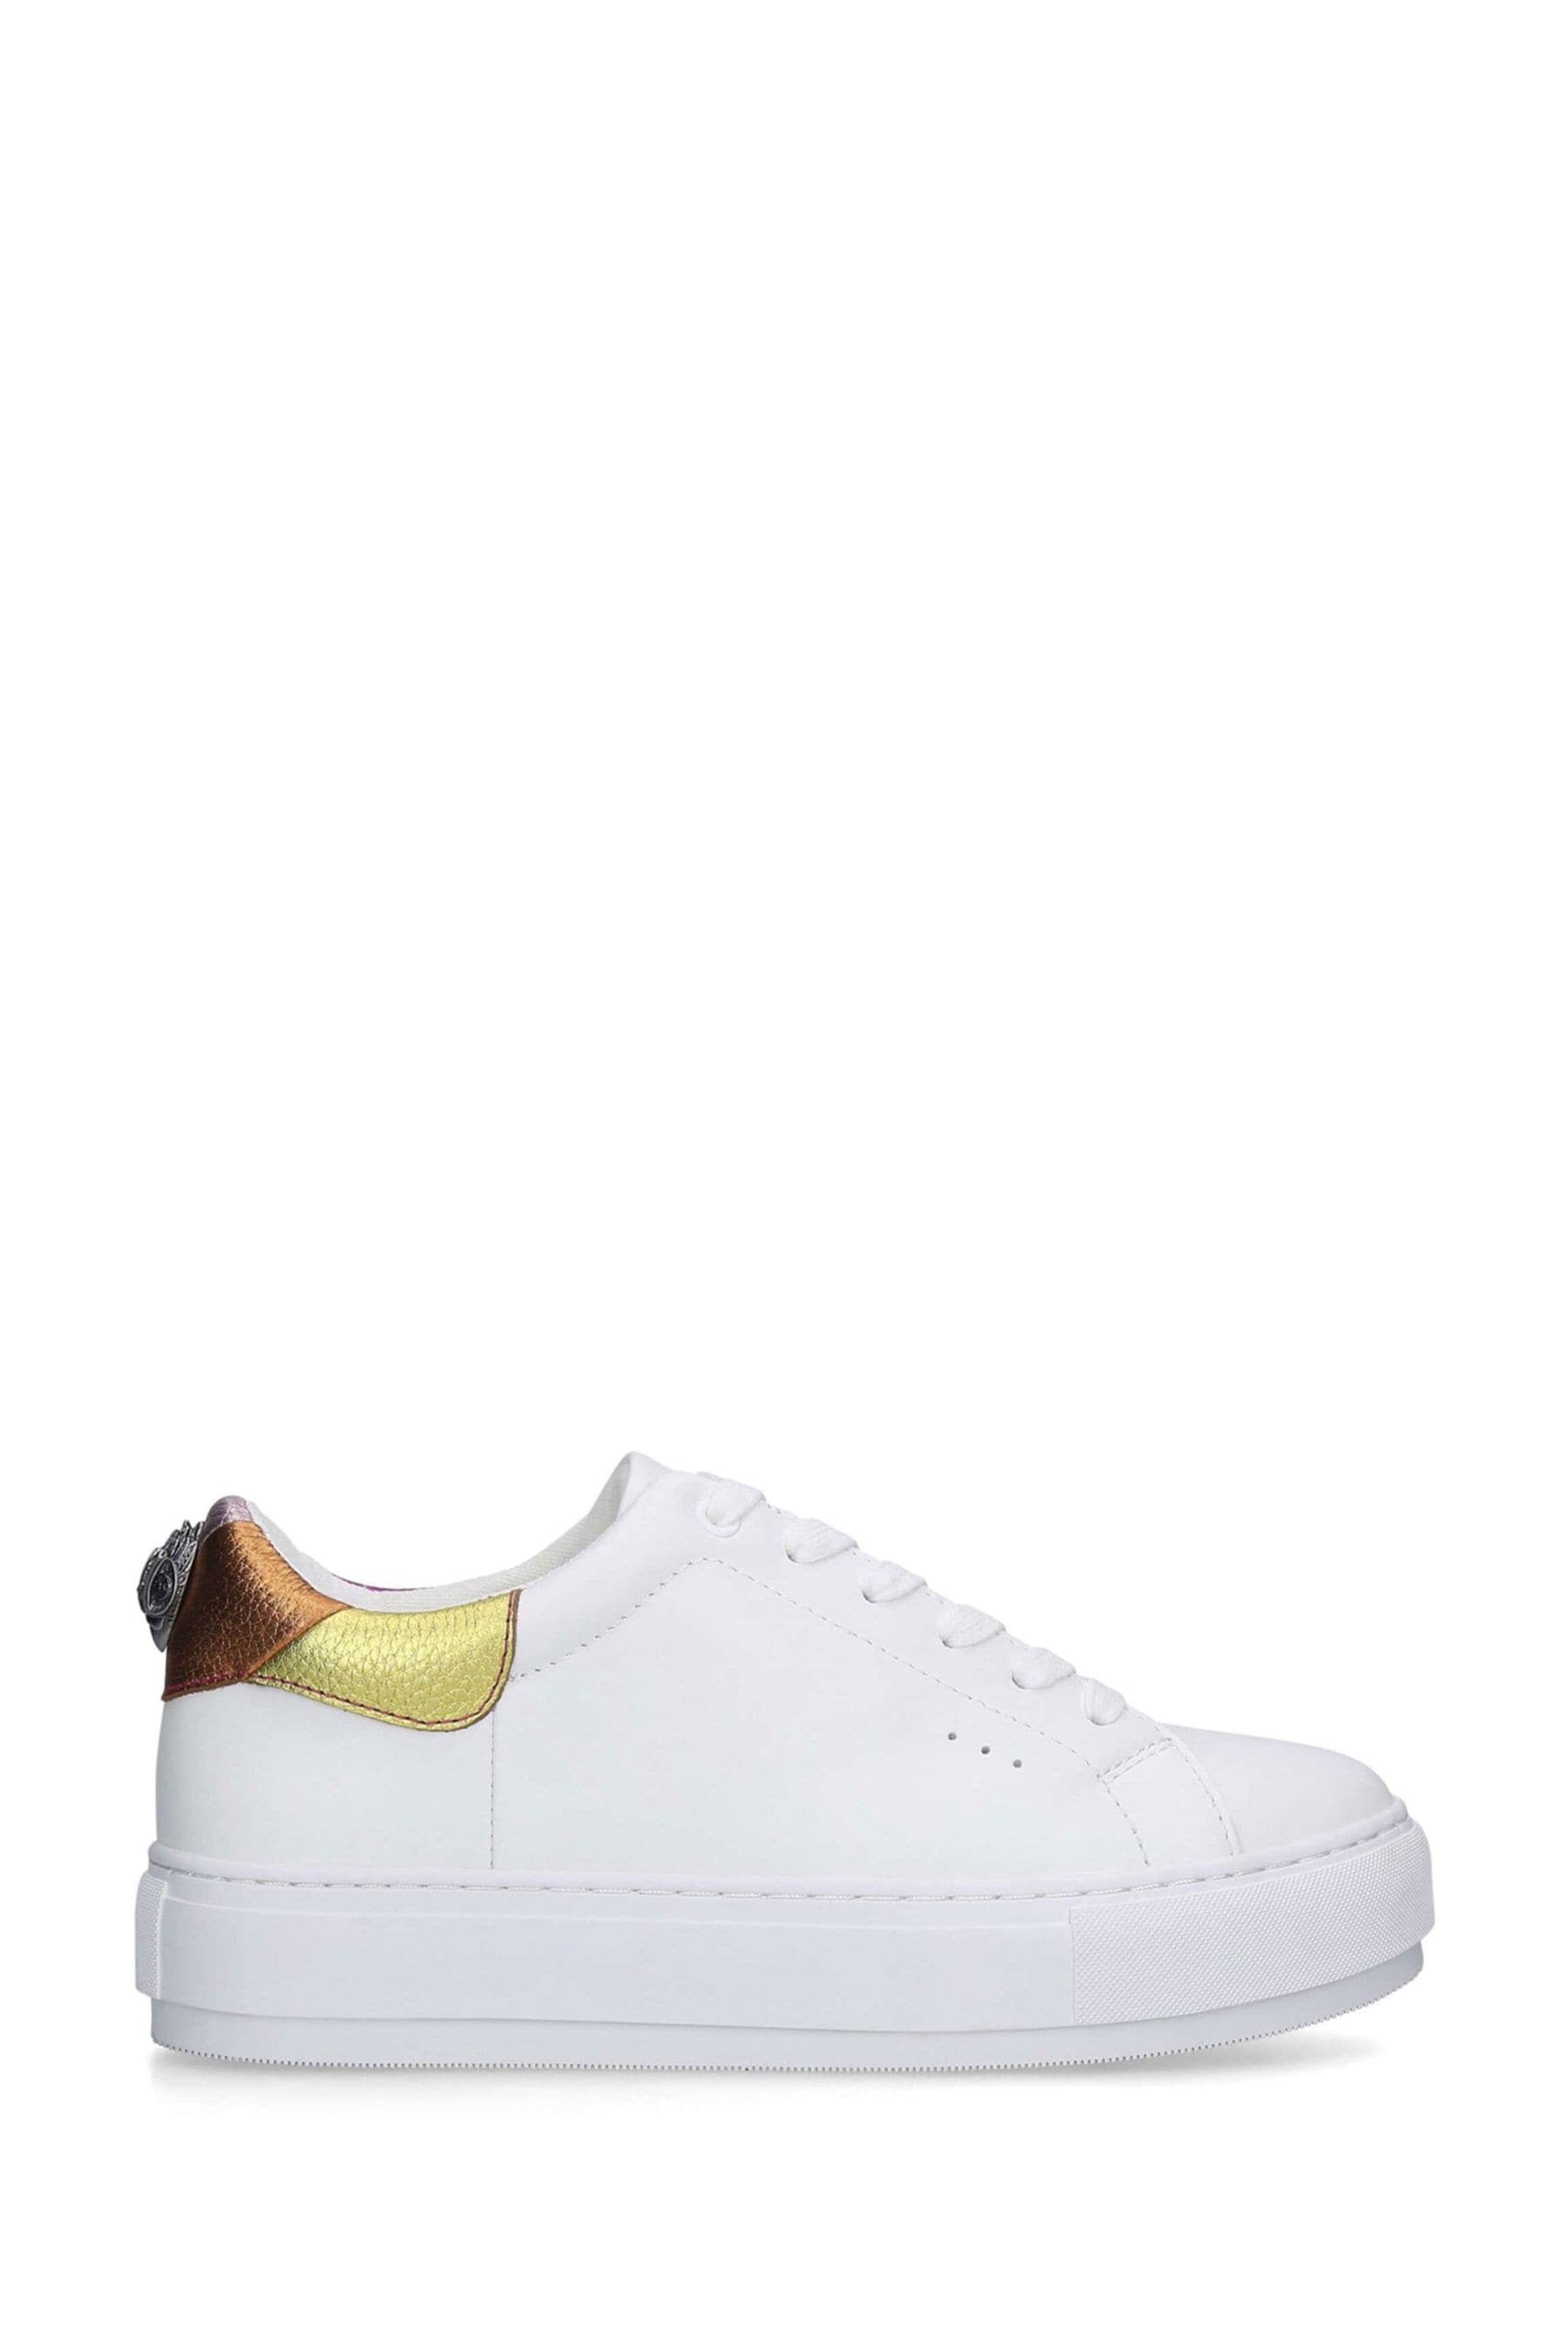 Buy Kurt Geiger London White Laney Eagle Trainers from the Next UK ...